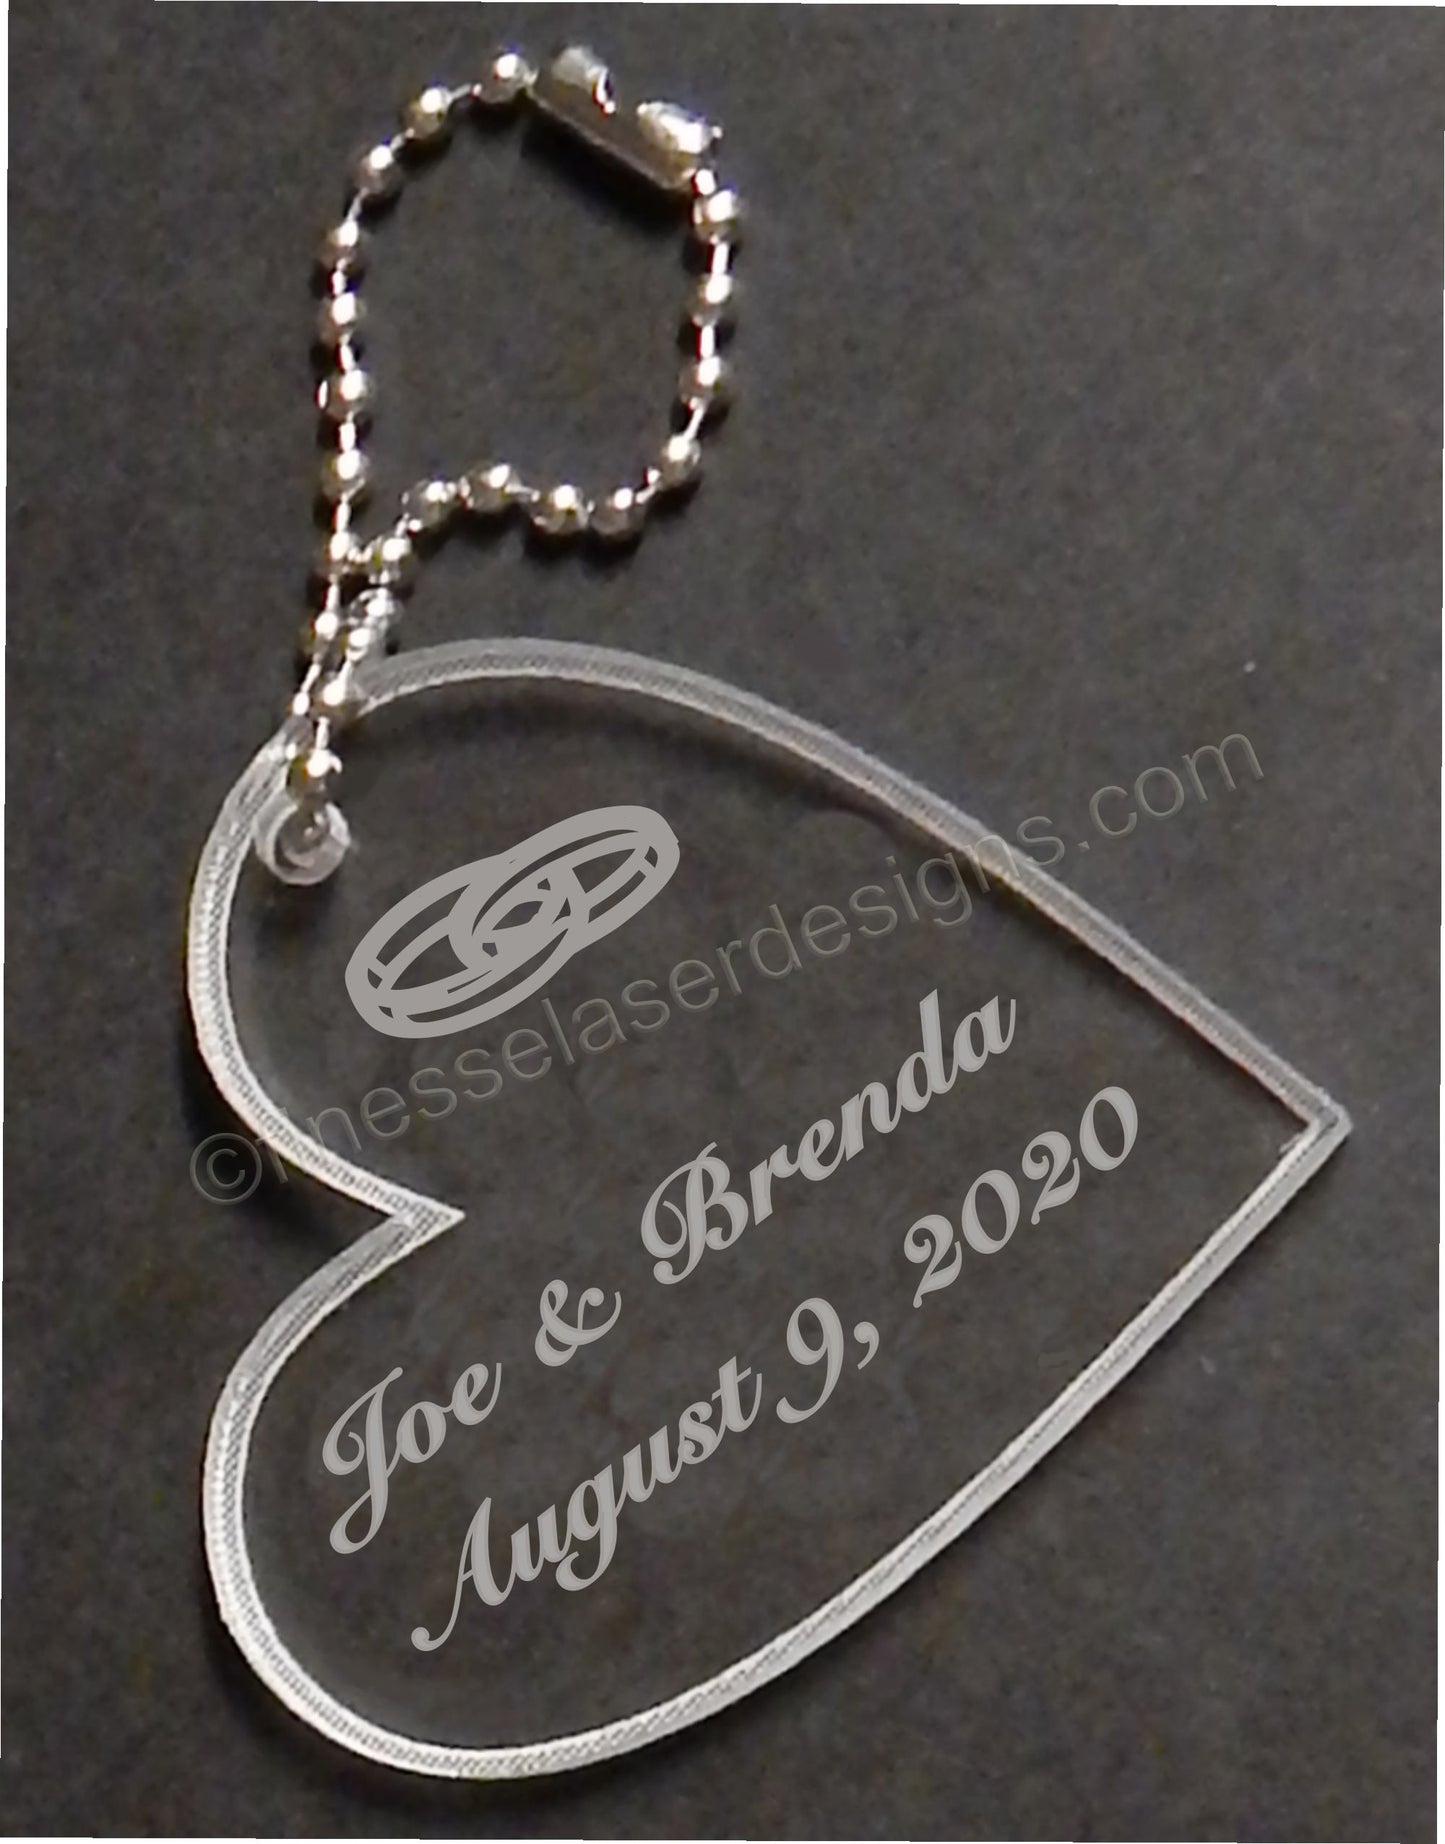 heart shaped acrylic keychain engraved with names and date and a wedding ring design, with a small metal chain attached